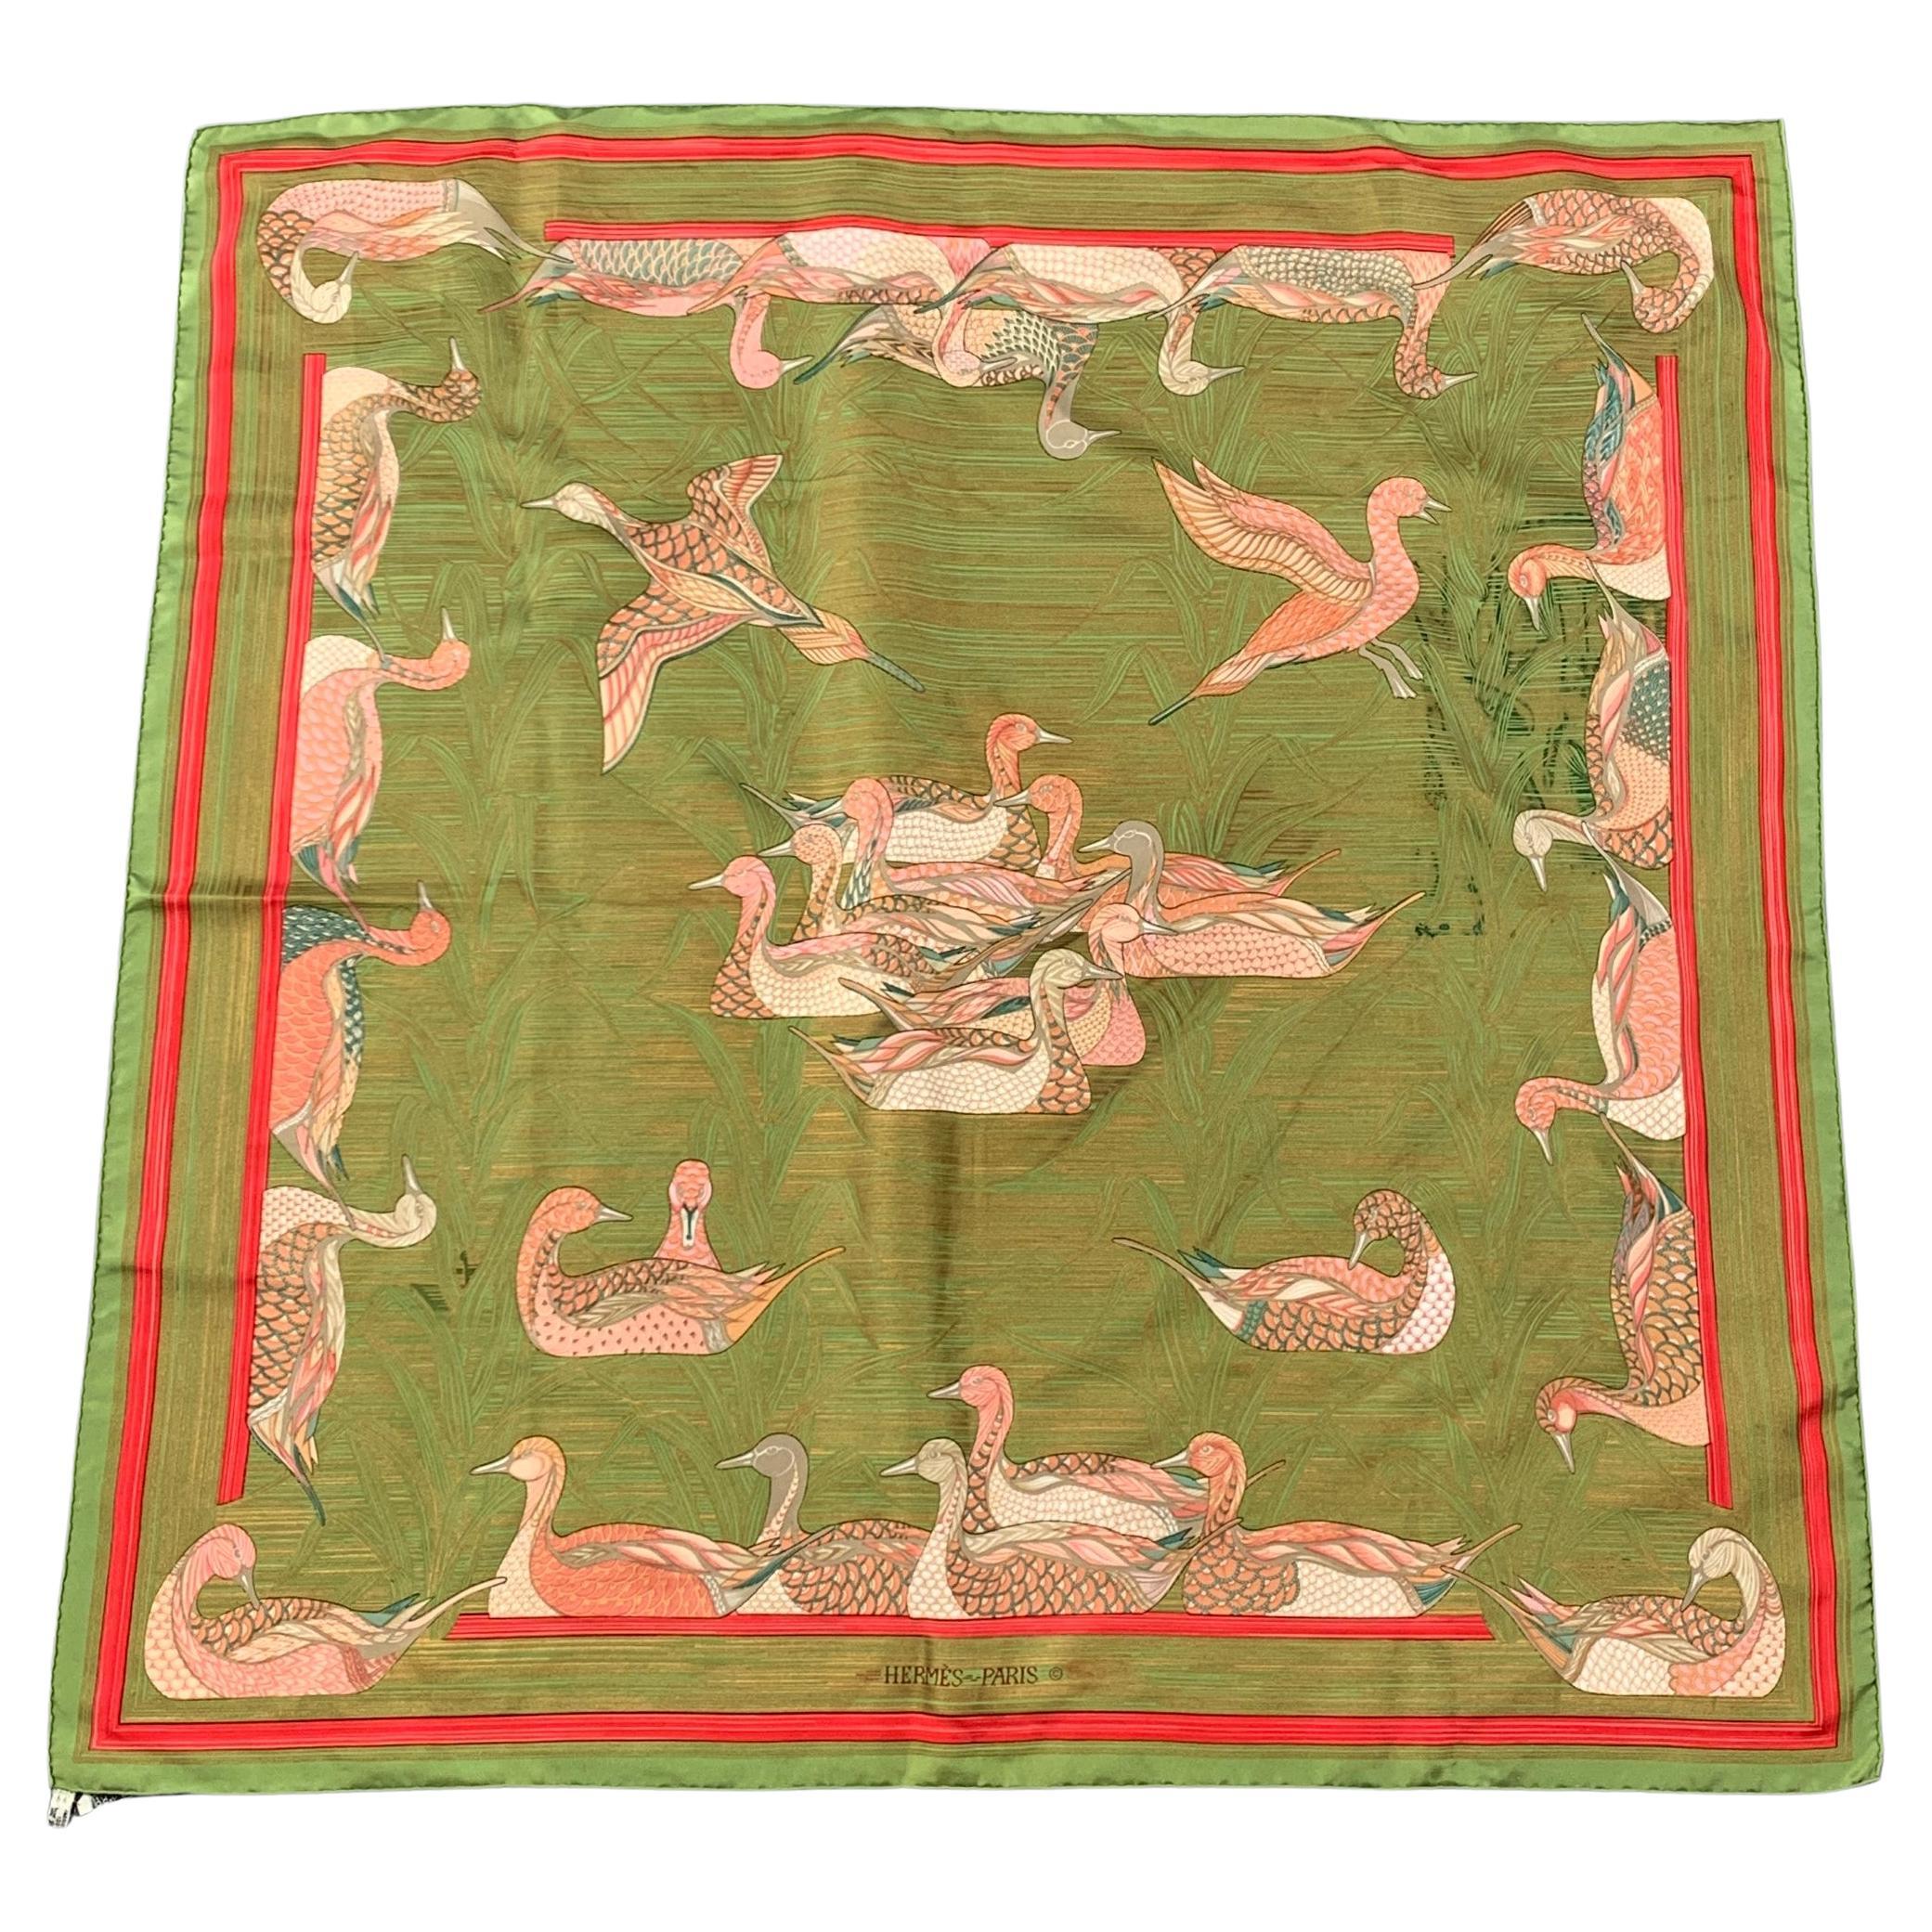 HERMES LA MARE AUX CANARDS Green Pink Print Silk Scarf